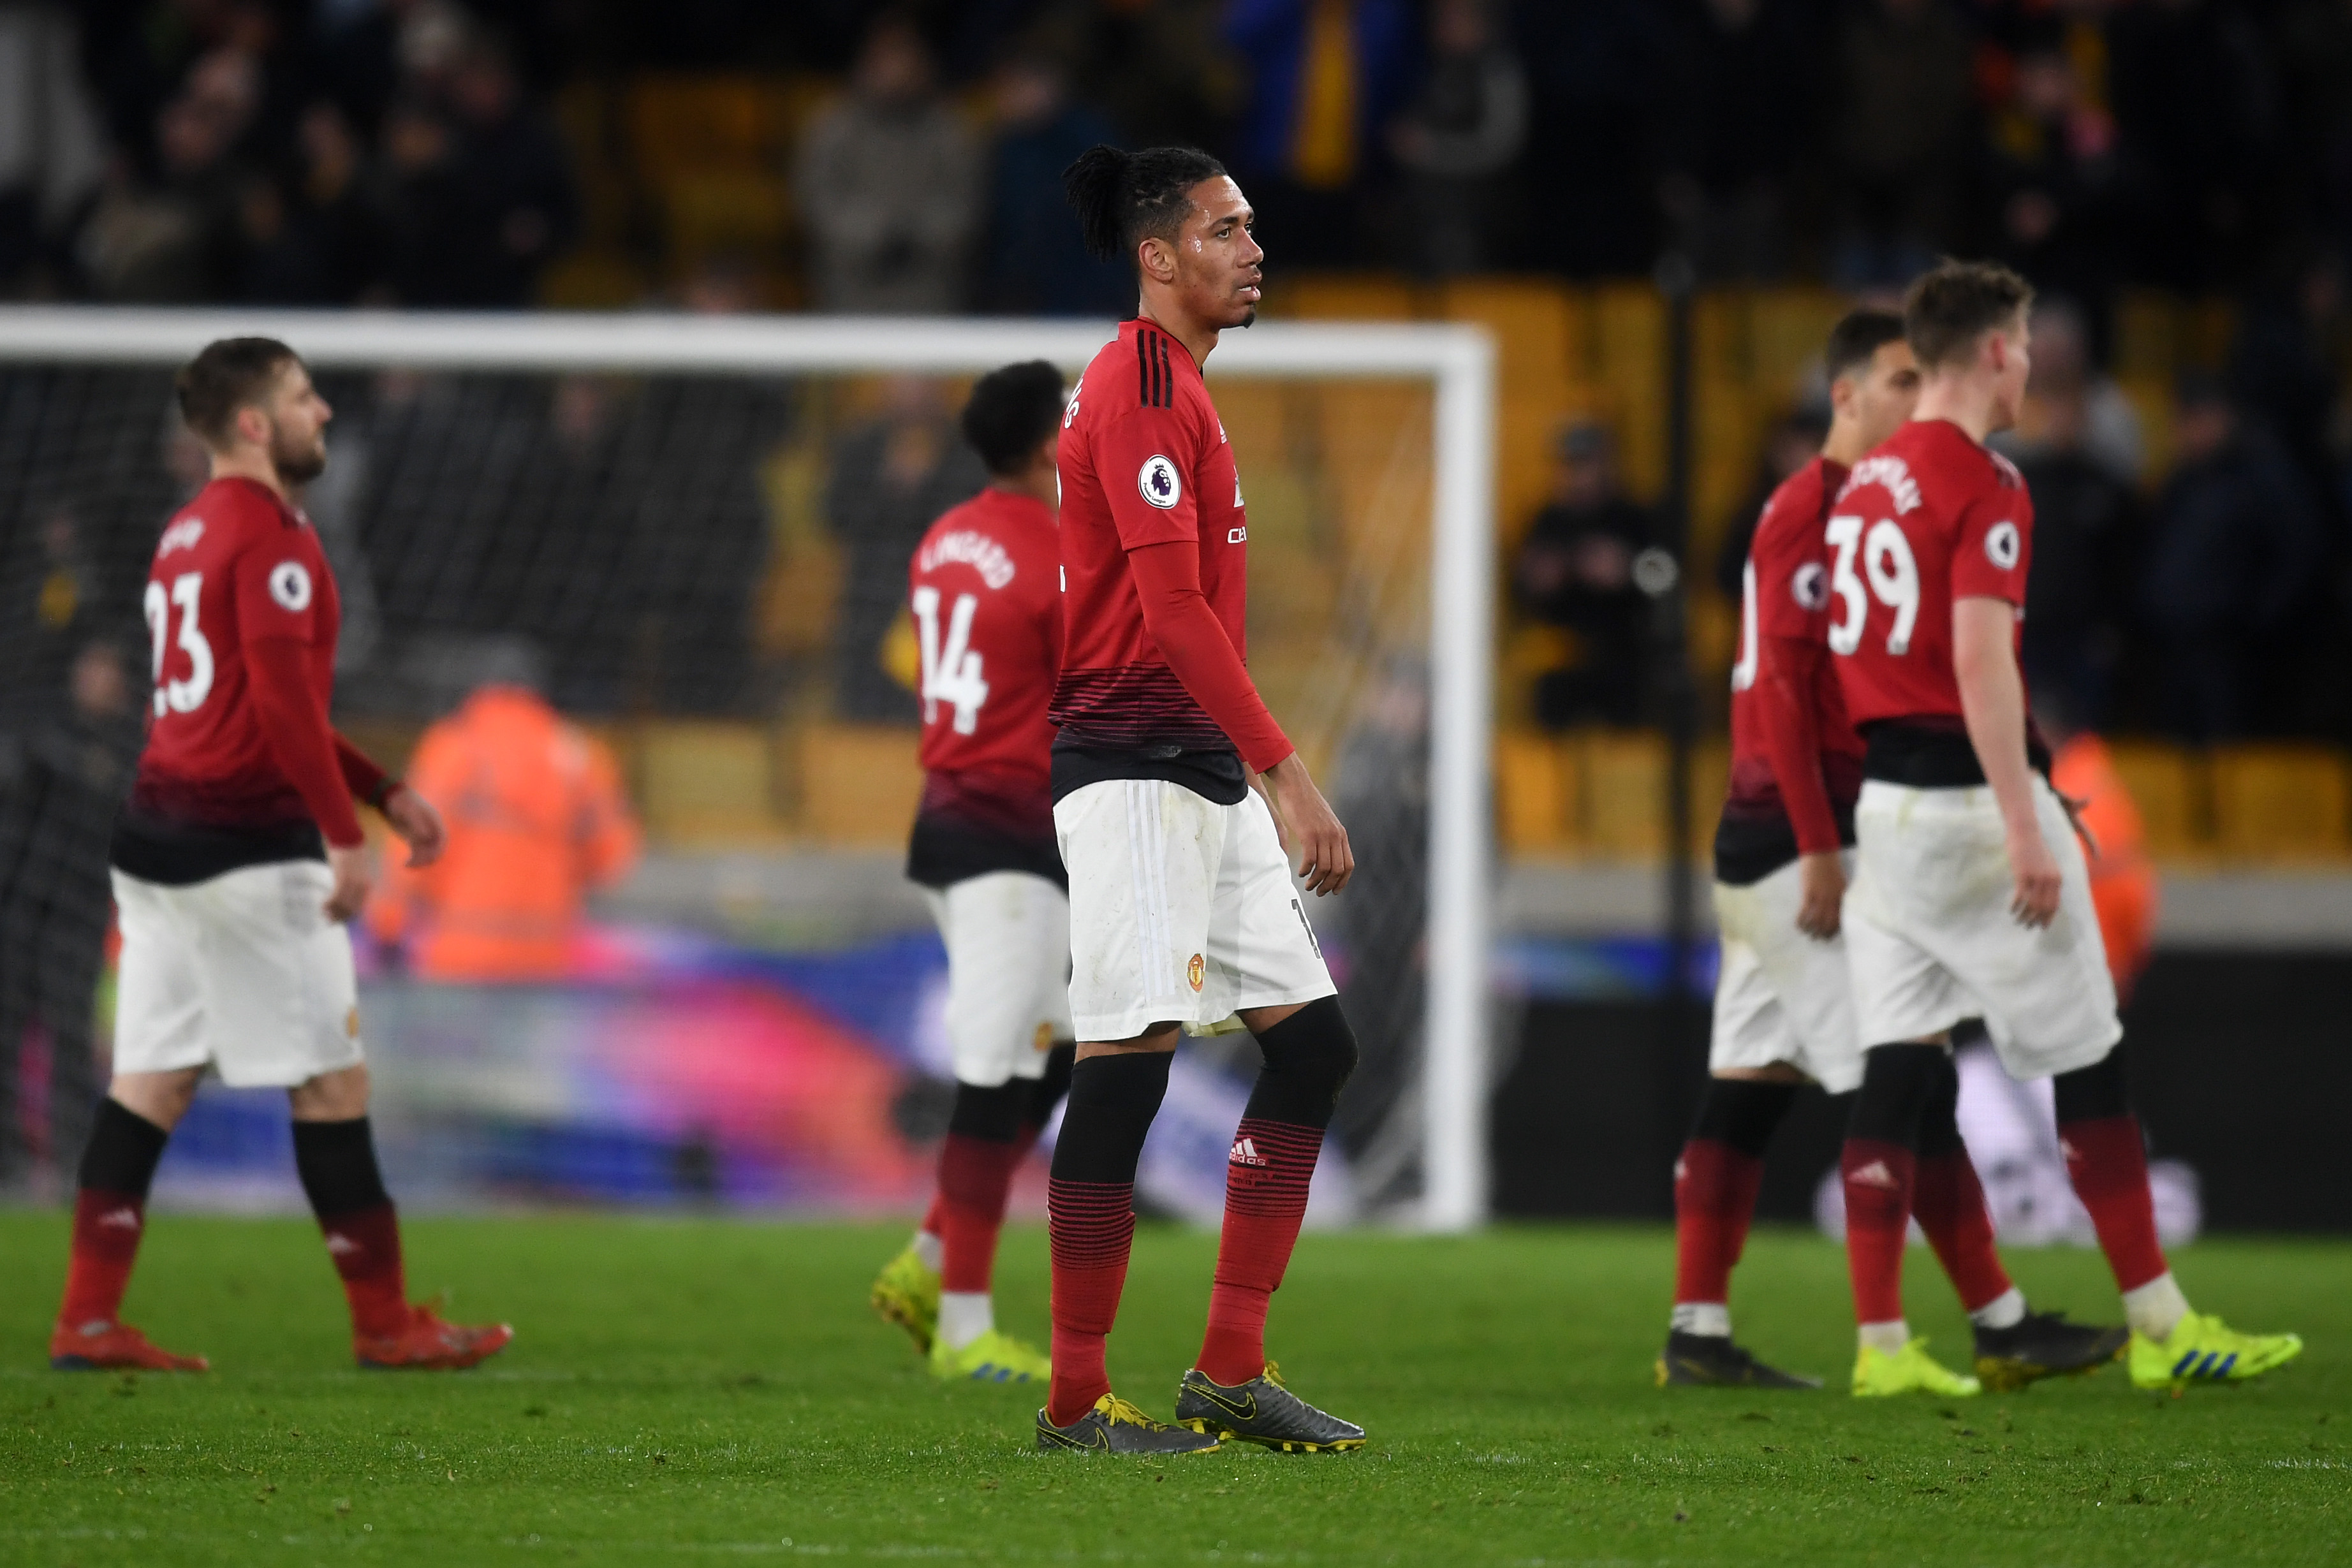 WOLVERHAMPTON, ENGLAND - APRIL 02:  Chris Smalling of Manchester United looks dejected following his sides defeat in the Premier League match between Wolverhampton Wanderers and Manchester United at Molineux on April 02, 2019 in Wolverhampton, United Kingdom. (Photo by Michael Regan/Getty Images)